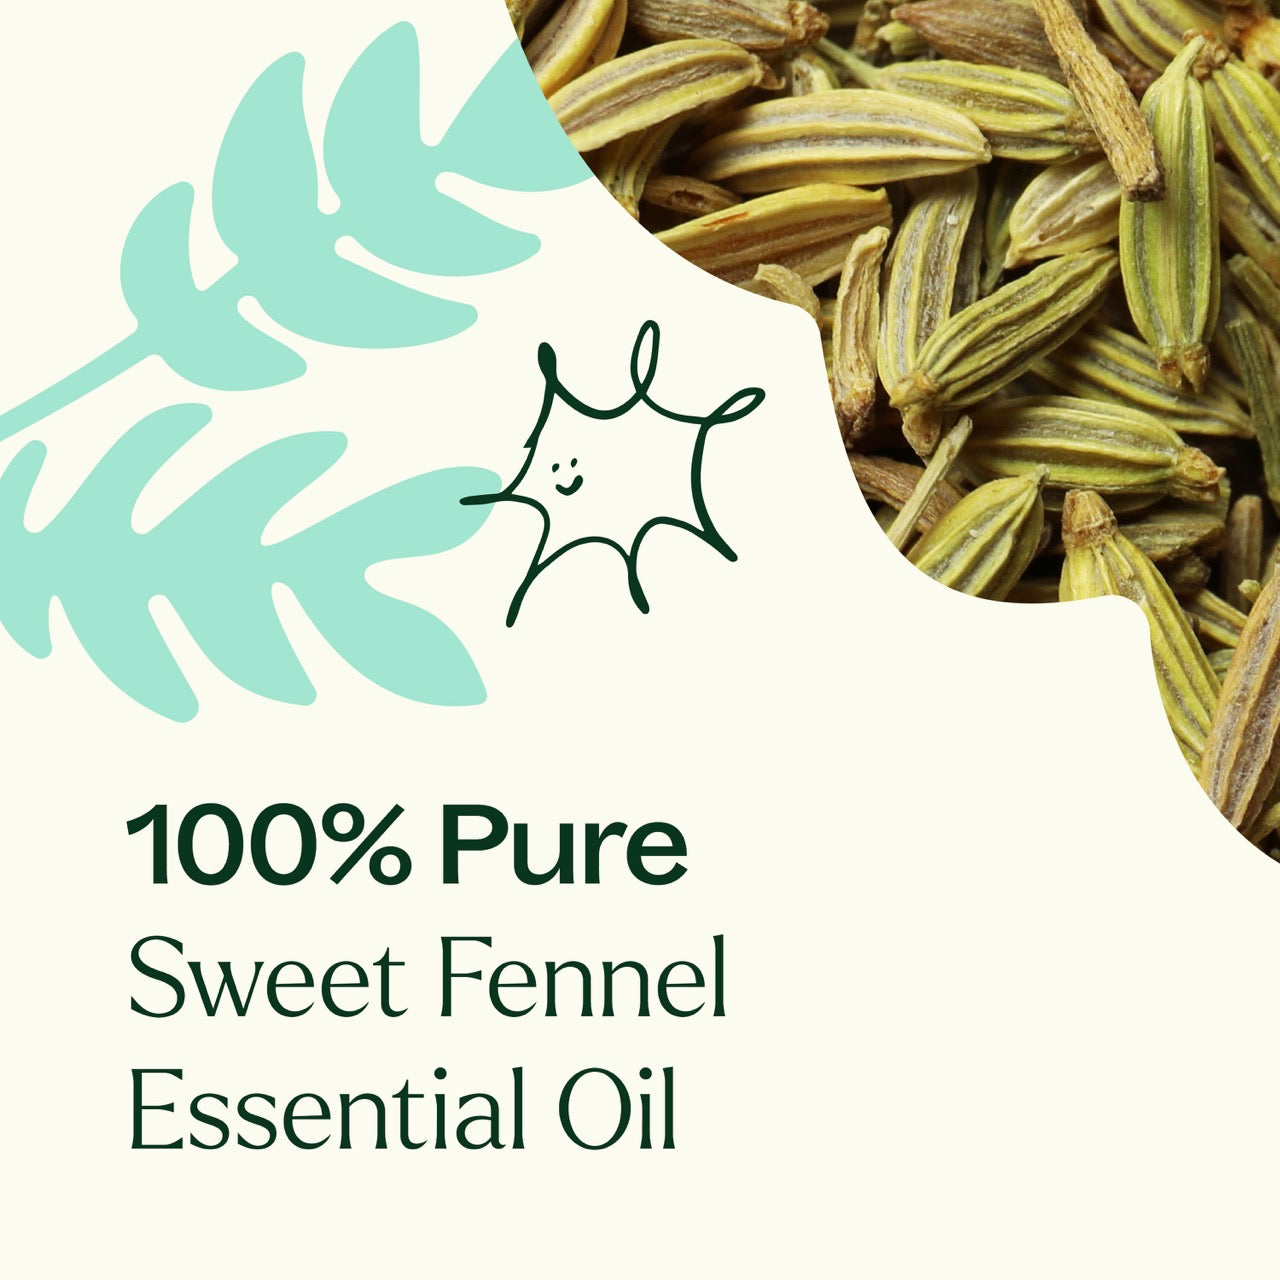 100% pure Sweet Fennel Essential Oil